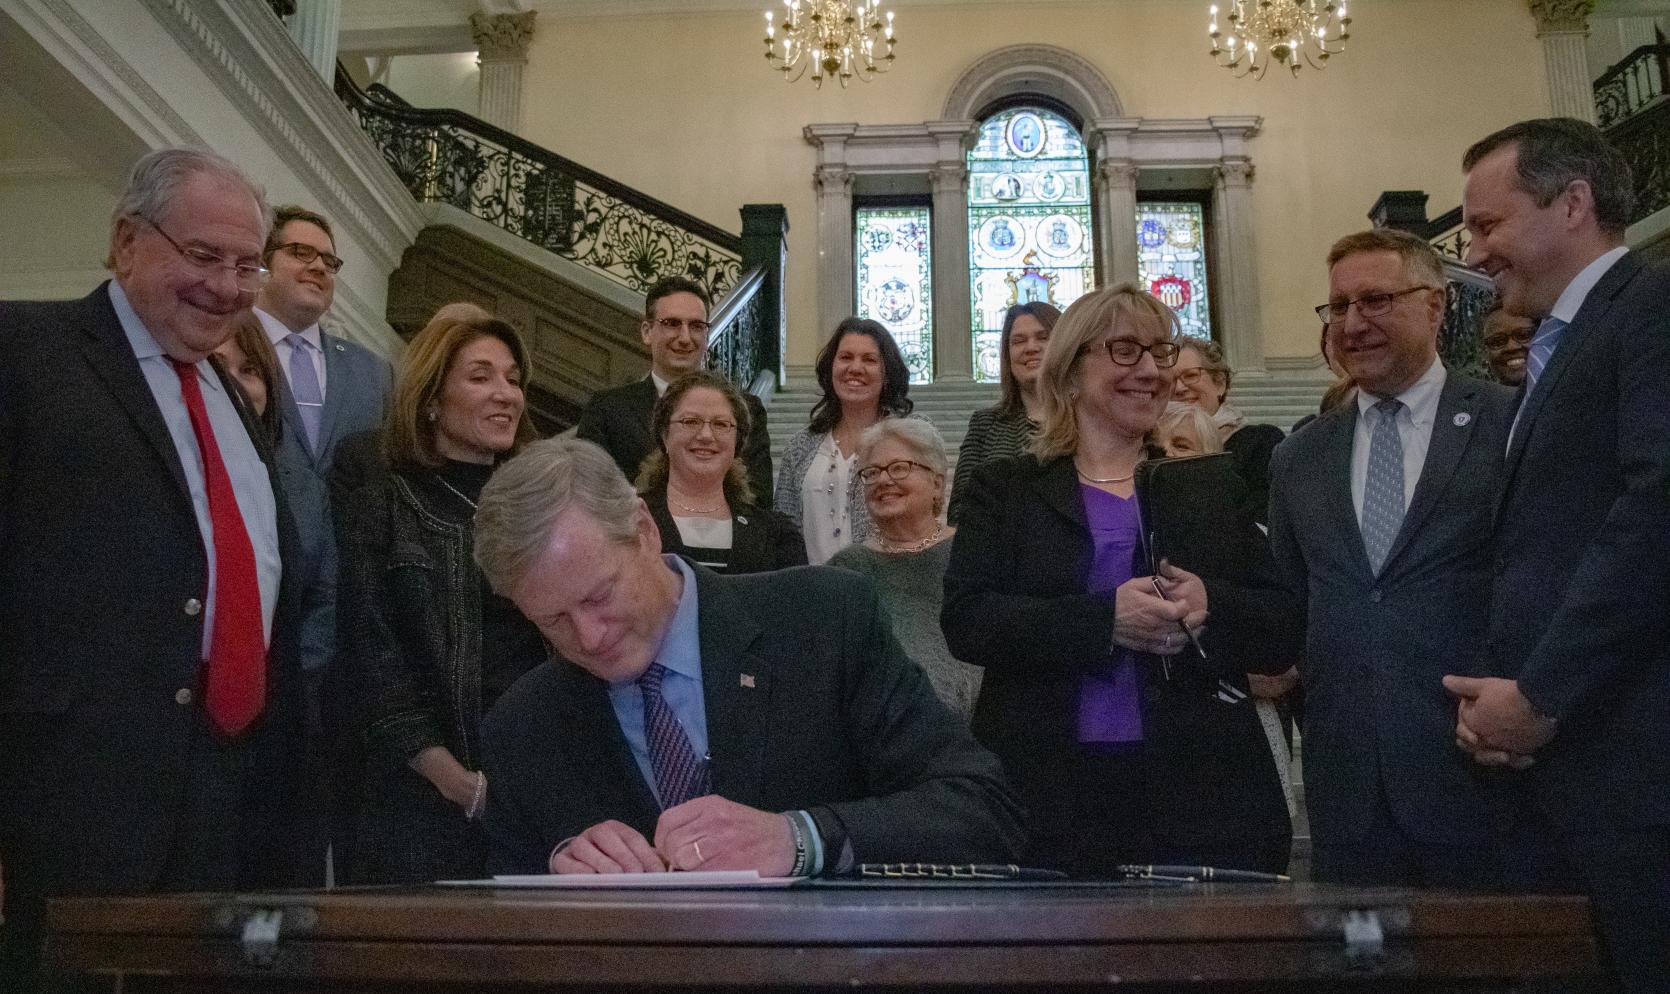 PHOTO RELEASE: Governor Baker Signs Bill to Restore Funding for Title X Services